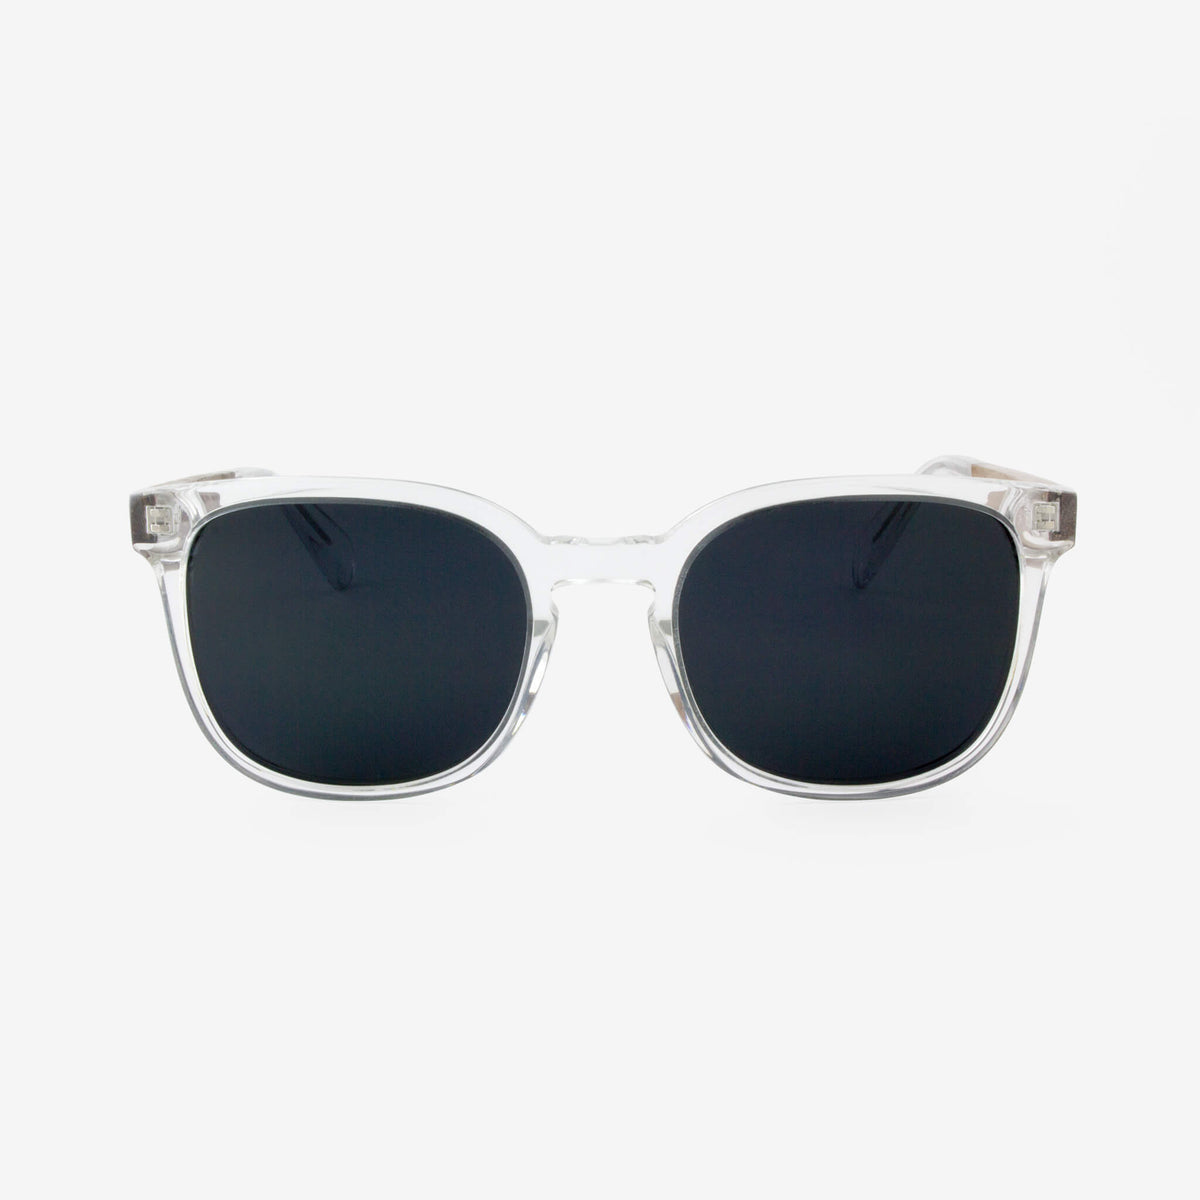 Vero clear acetate and wood sunglasses